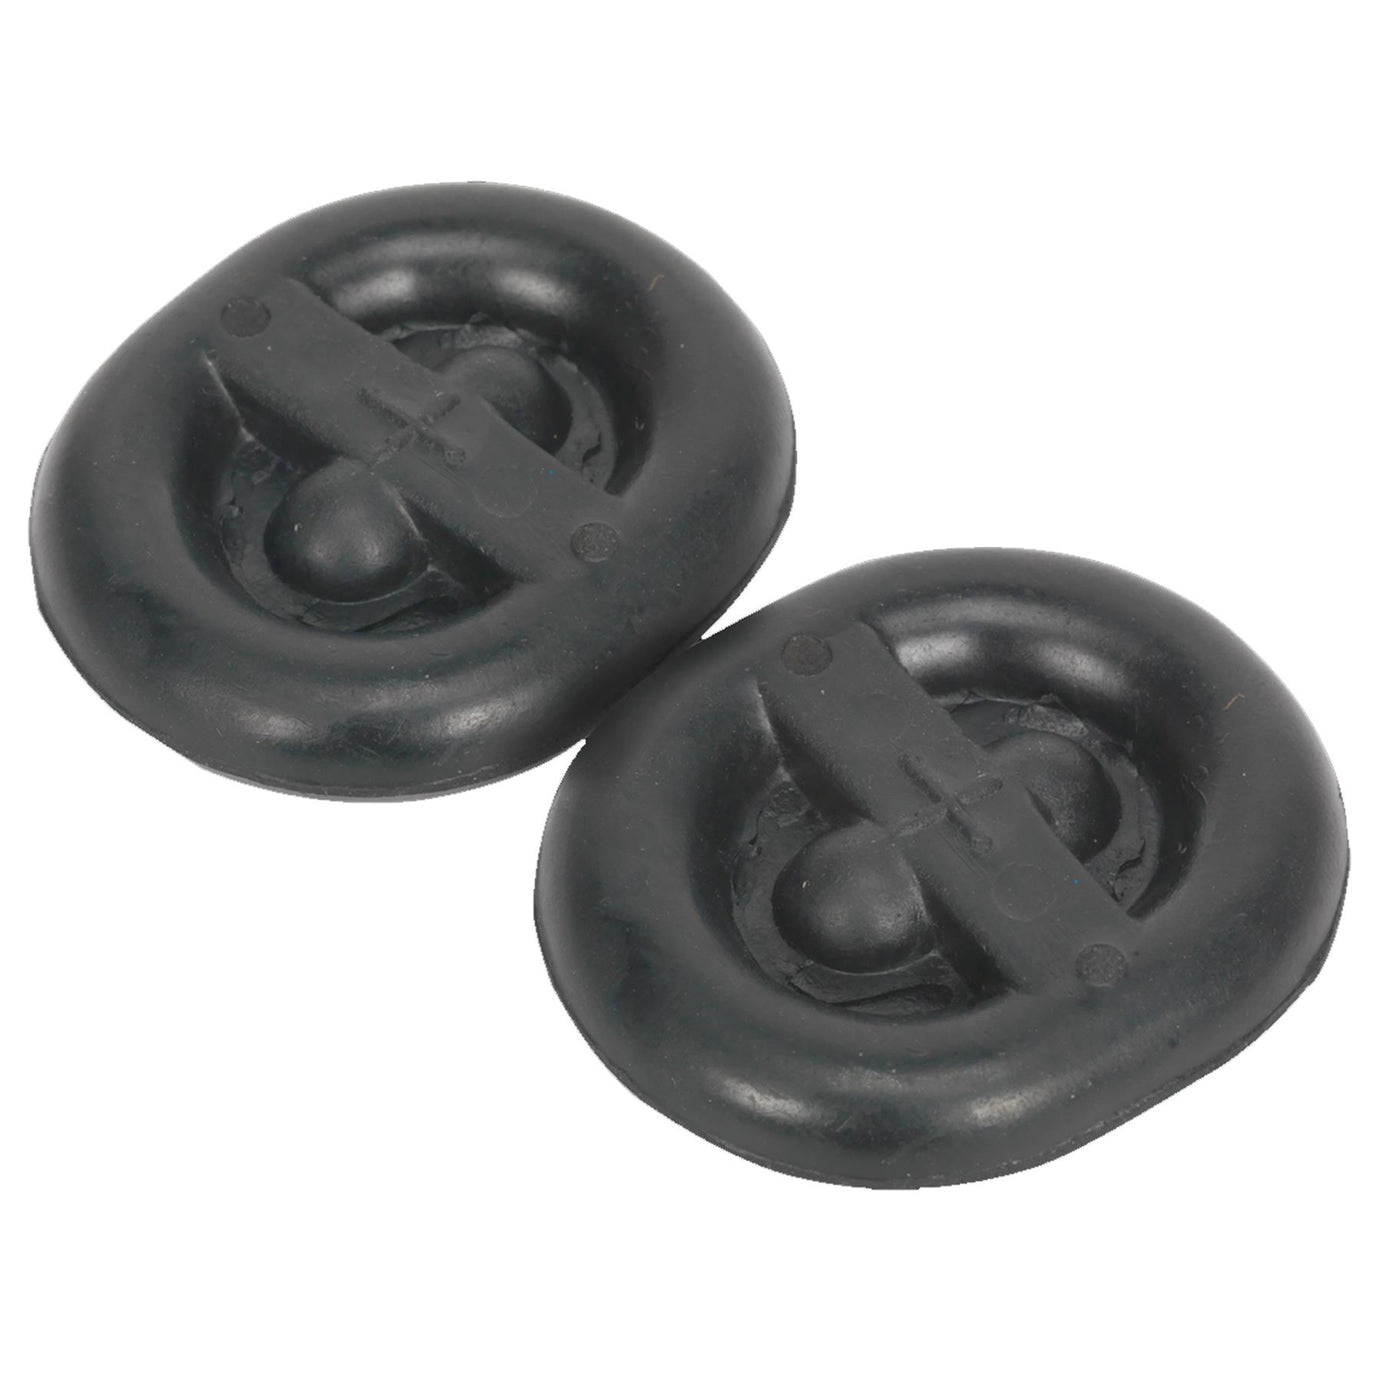 Sealey Exhaust Mounting Rubbers - L62 x D54 x H13.5 (Pack of 2)